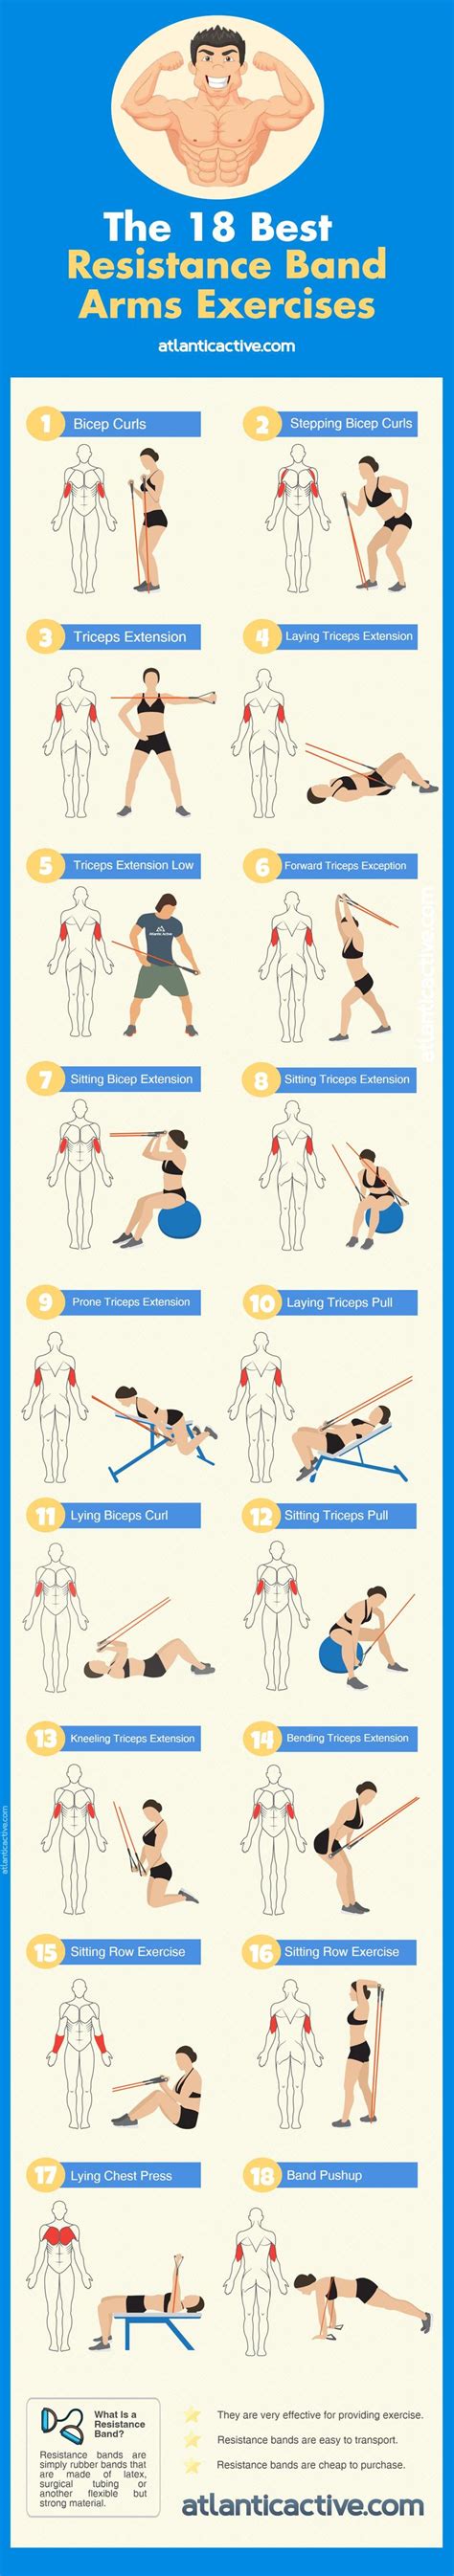 72 Best Images About Resistance Band Exercises On Pinterest